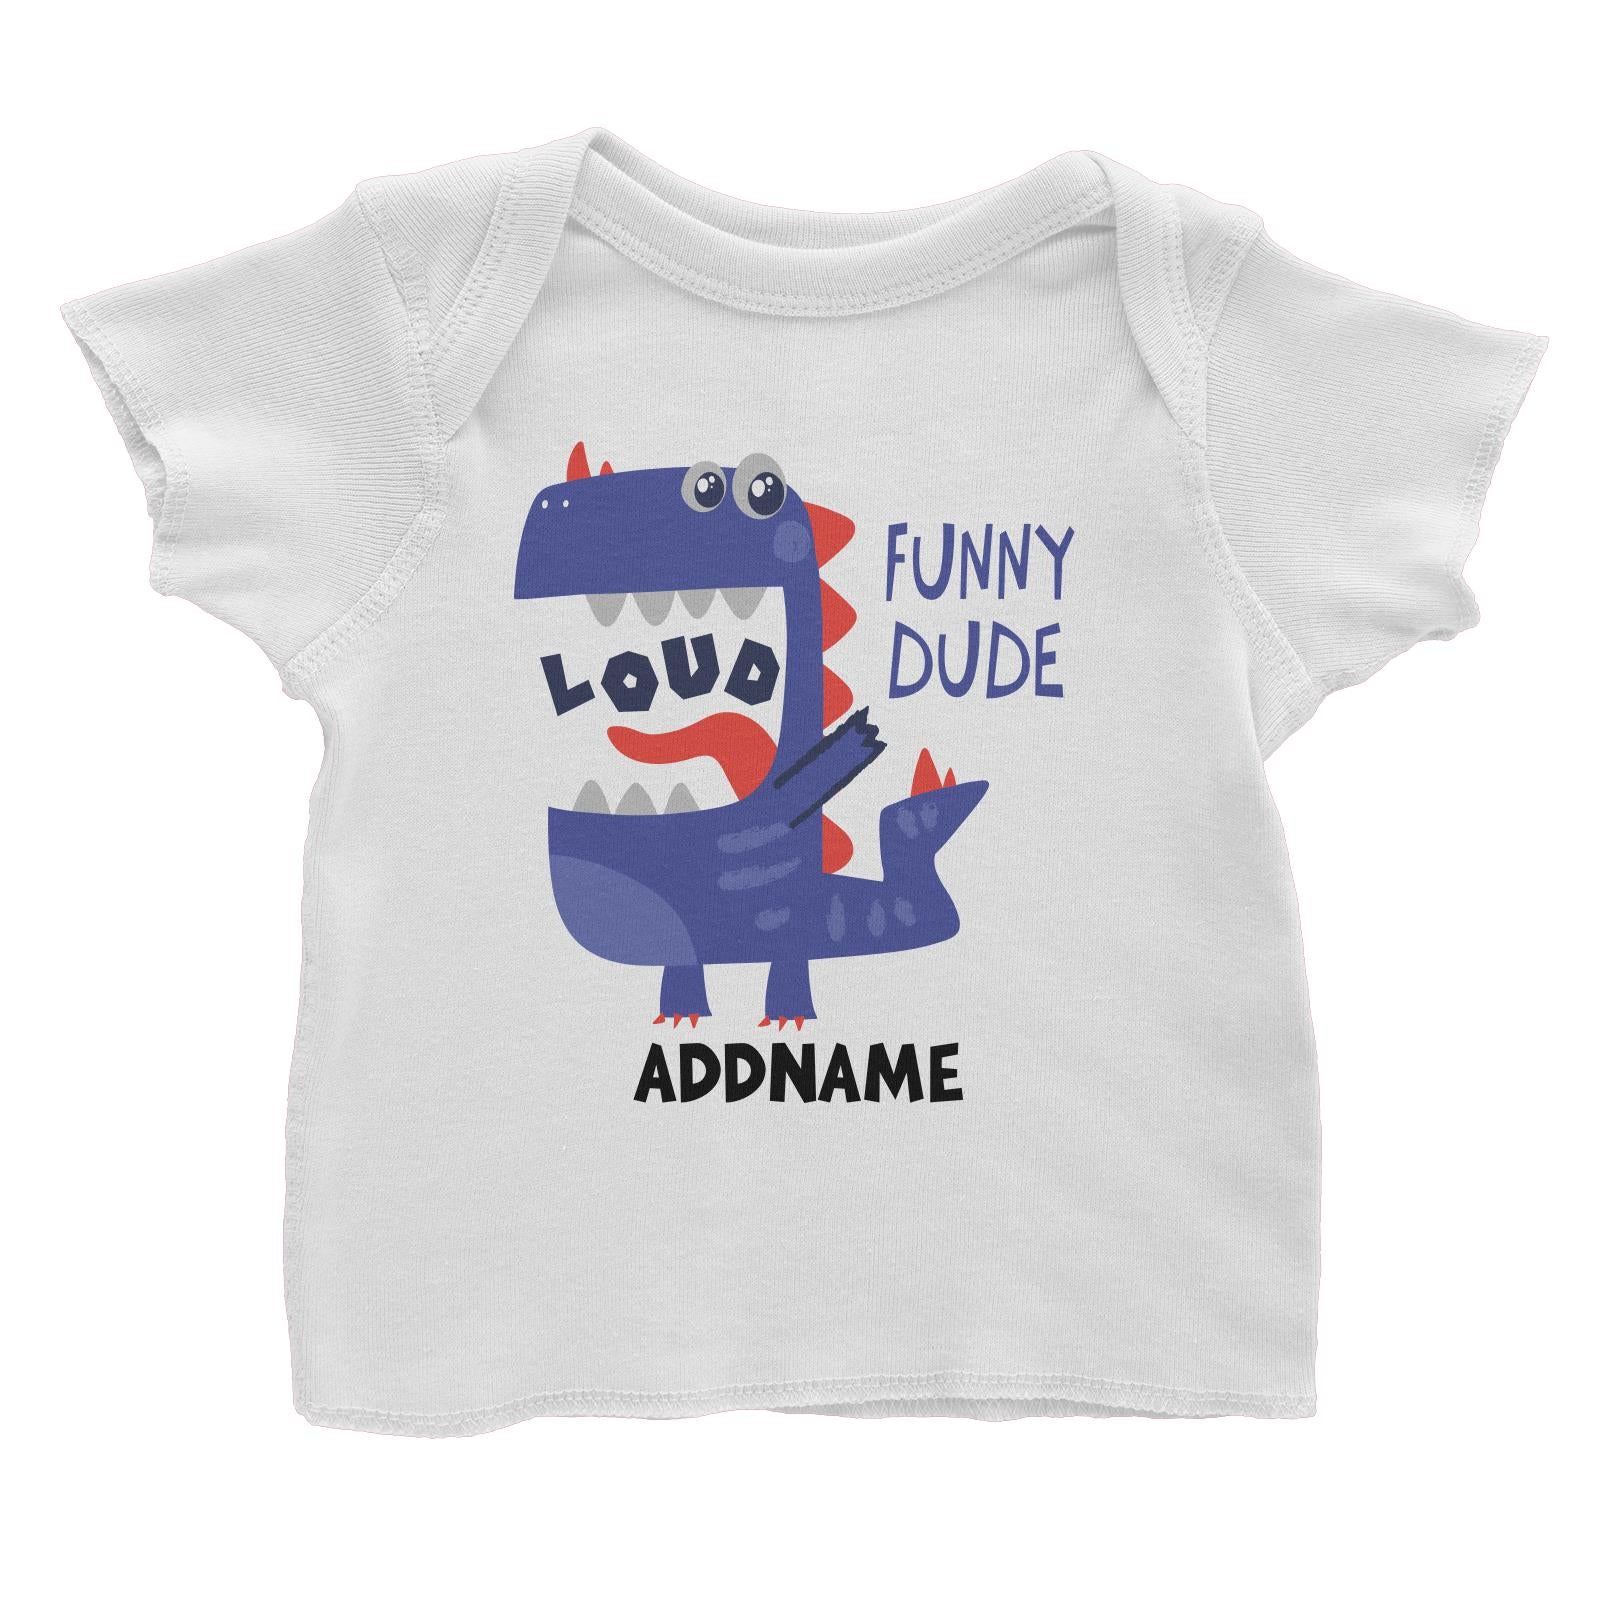 Loud Funny Dude Dinosaur Addname White Baby T-Shirt